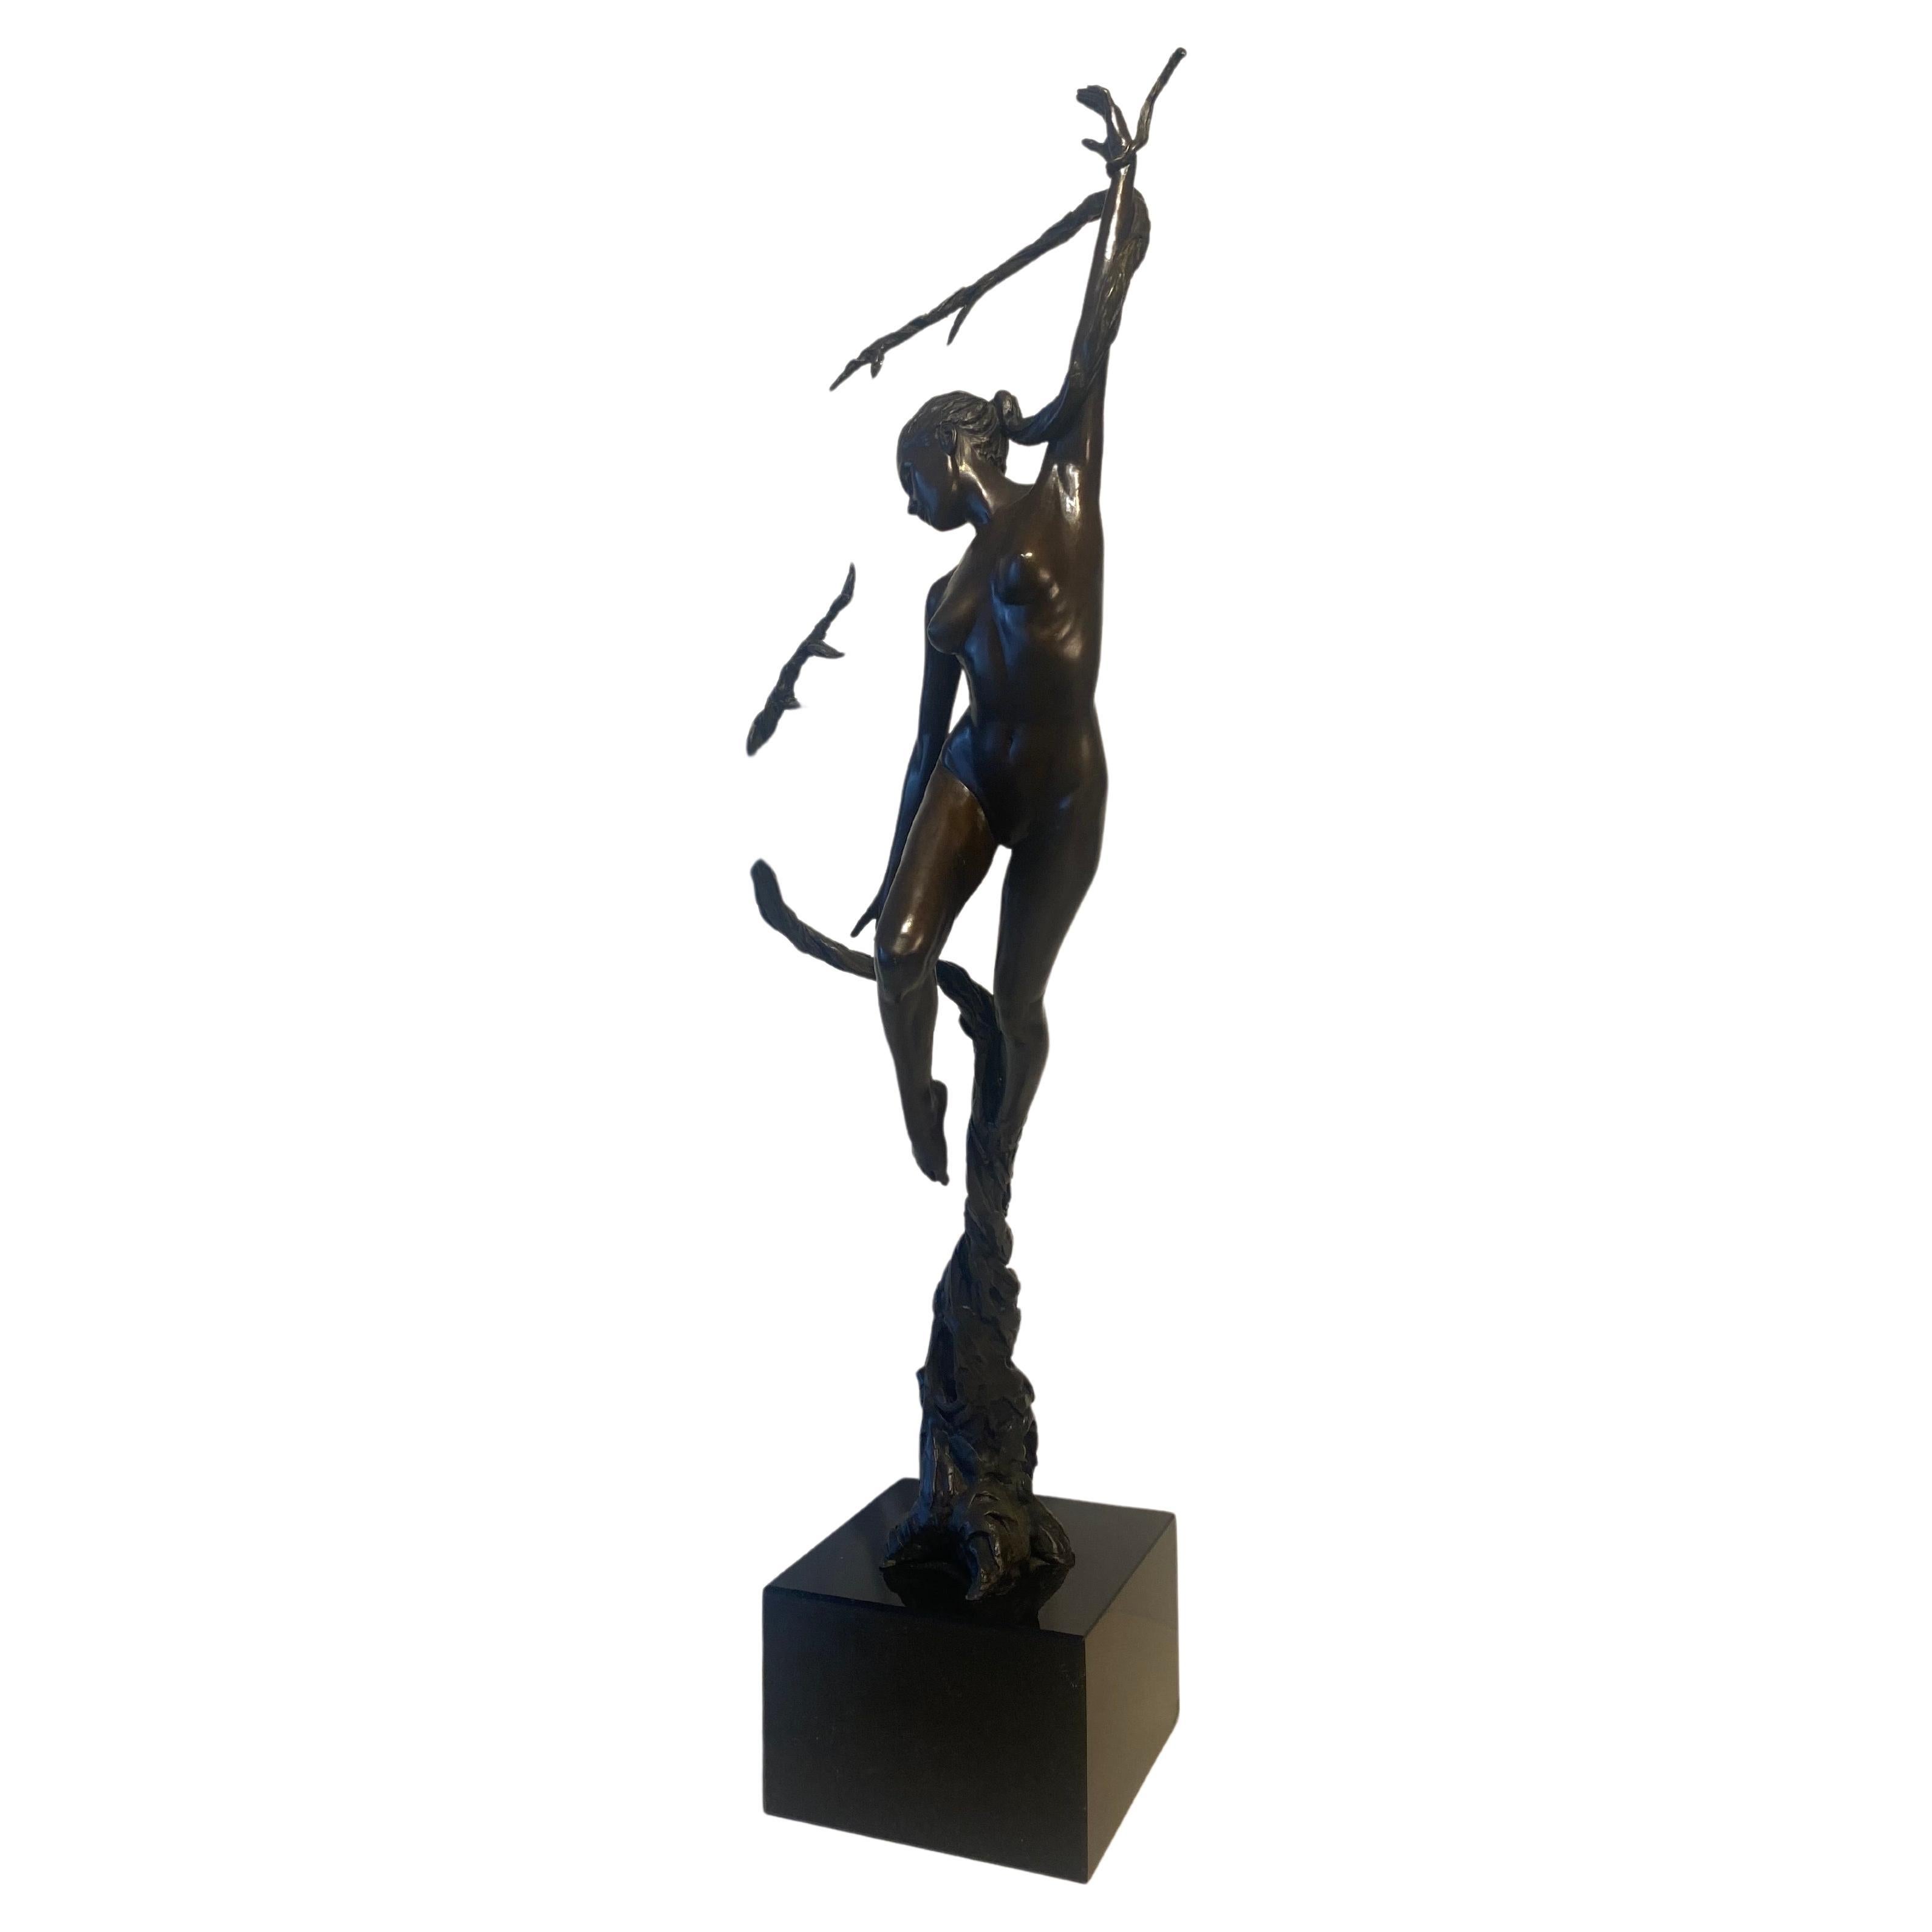 Neil Welch Nature’s Grace A Large Limited Edition of 25 Bronze Sculpture 1/25 For Sale 5